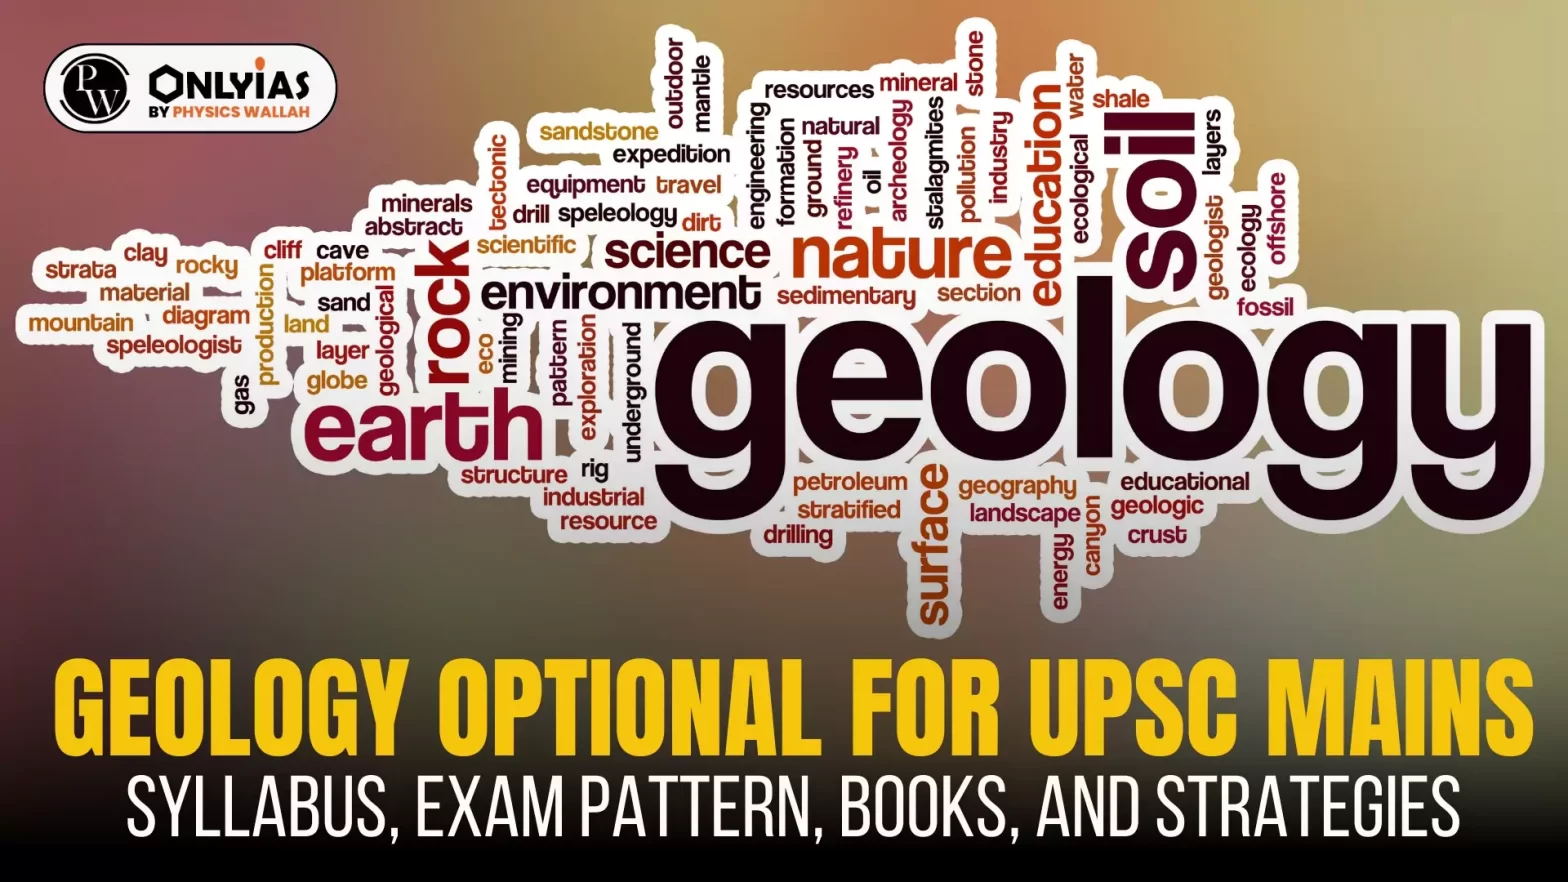 Geology Optional For UPSC Mains: Syllabus, Exam Pattern, Books, and Strategies